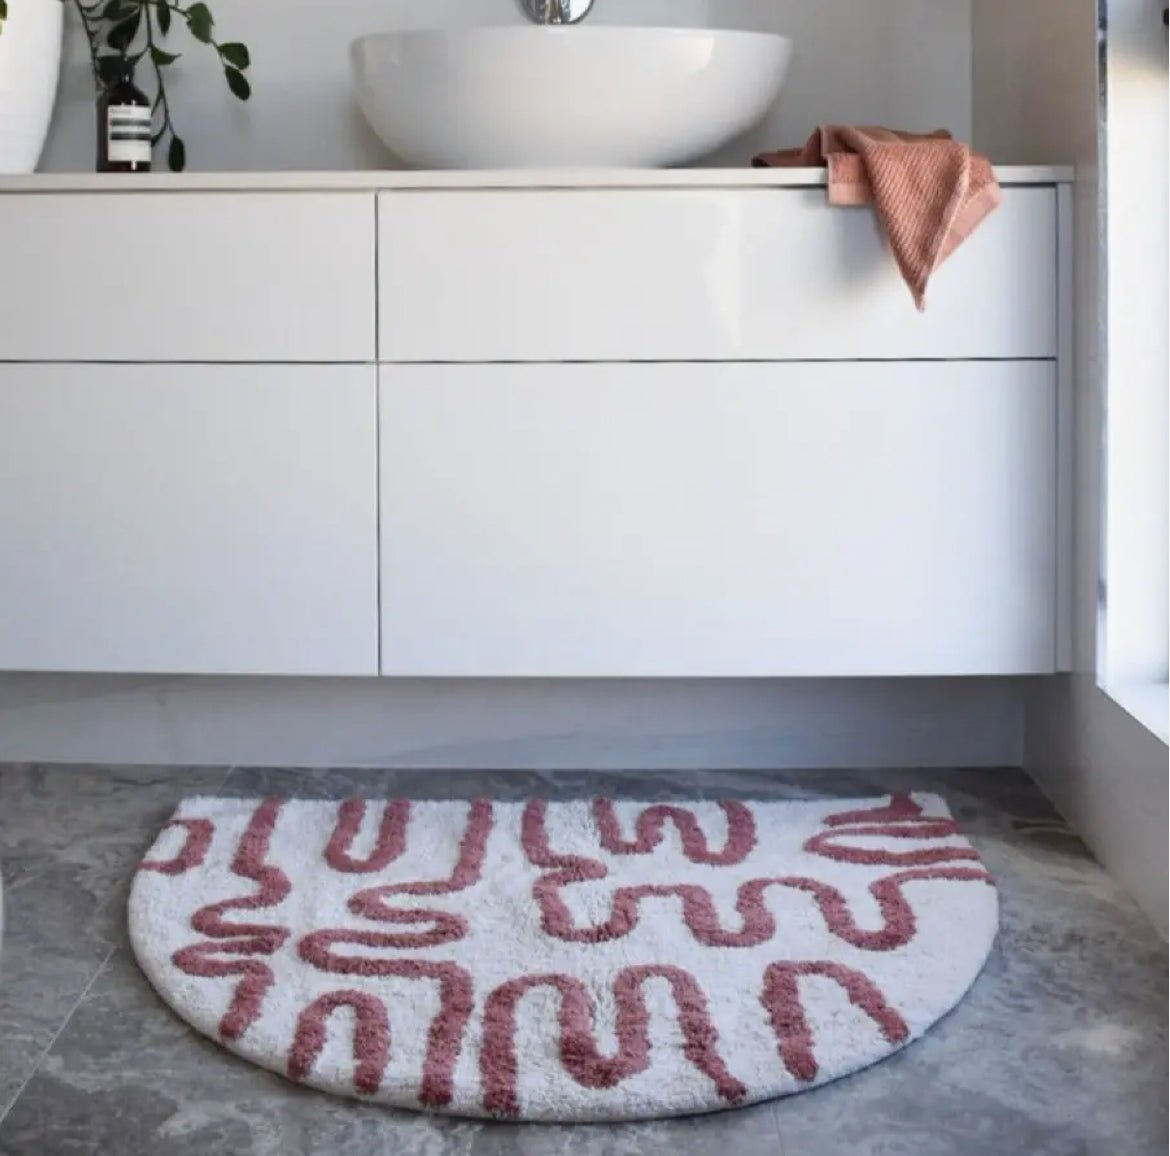 ‘Going Places’ Arch Bath Mat - EcoLuxe Furnishings